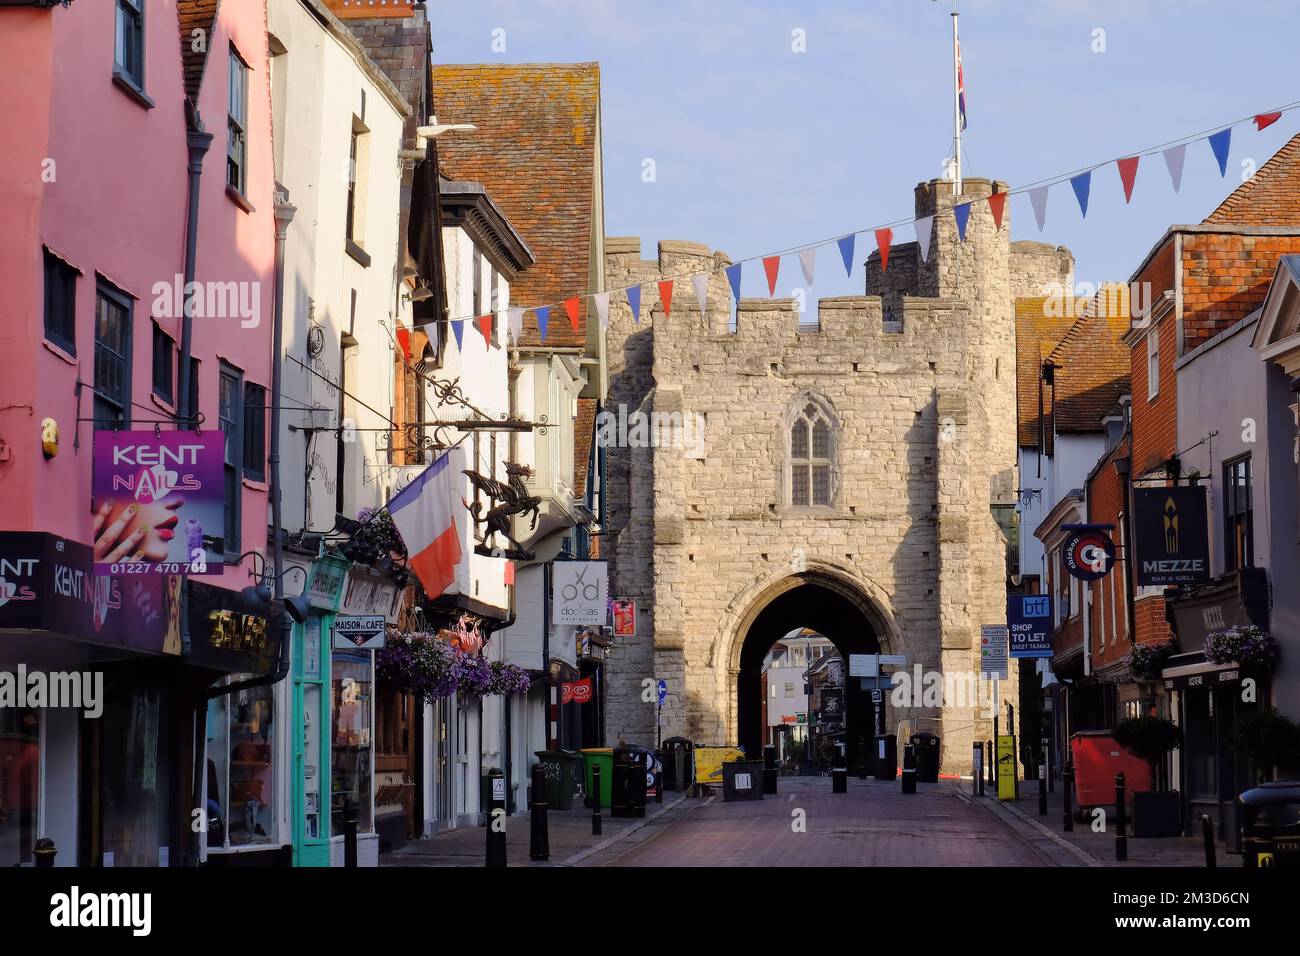 Westgate Towers medieval gatehouse soon after sunrise and shops in St Peter’s Street (High Street), Canterbury, Kent, England Stock Photo